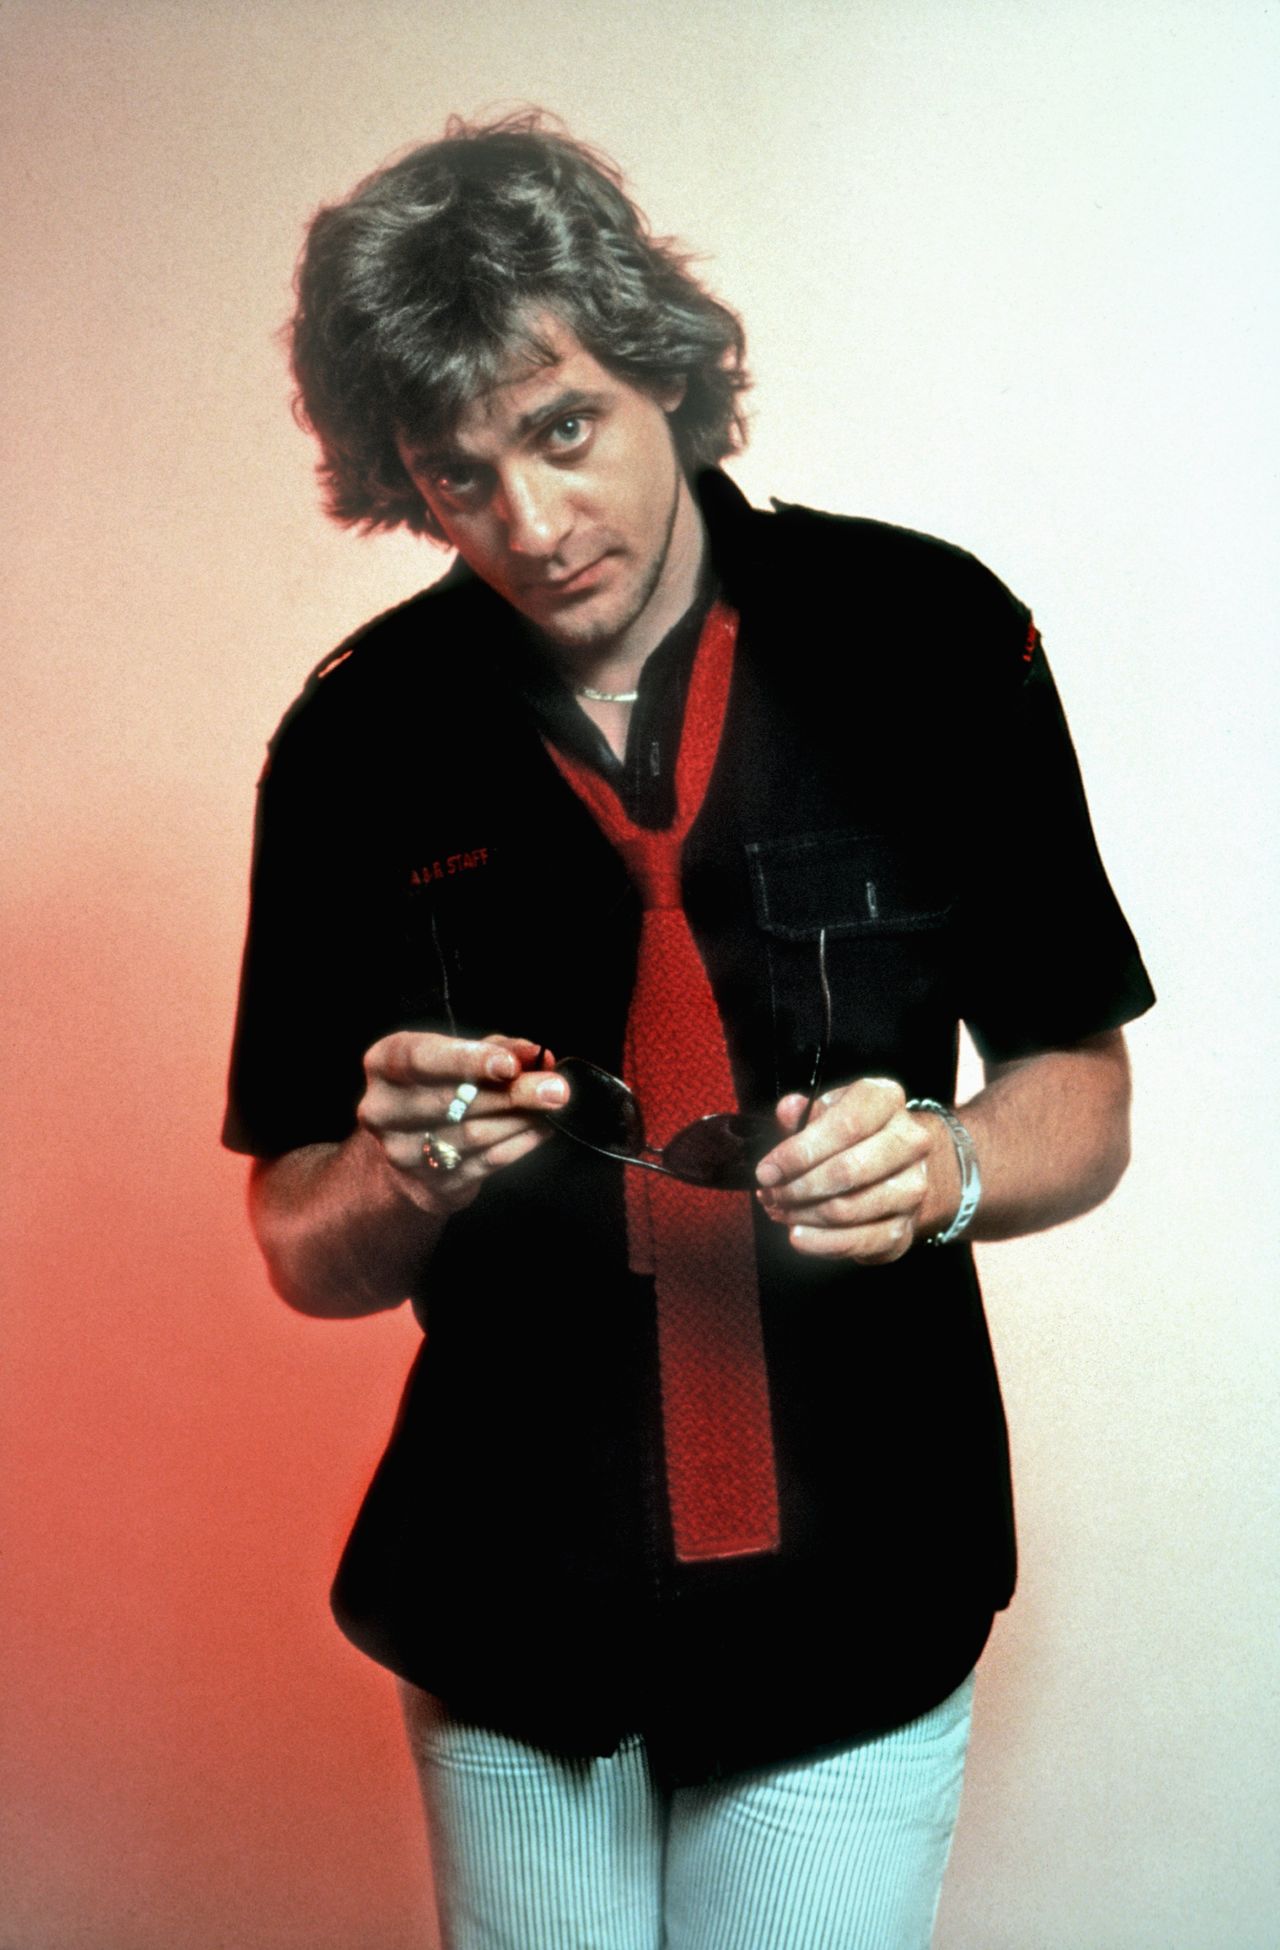 <a href="https://www.cnn.com/2019/09/13/entertainment/eddie-money-cancer-death-trnd/index.html" target="_blank">Eddie Money</a>, the singer and songwriter that was known for hits from the 1970's and 1980's such as "Baby Hold On" and "Take Me Home Tonight," died September 13 following complications from esophageal cancer, his family announced. He was 70.